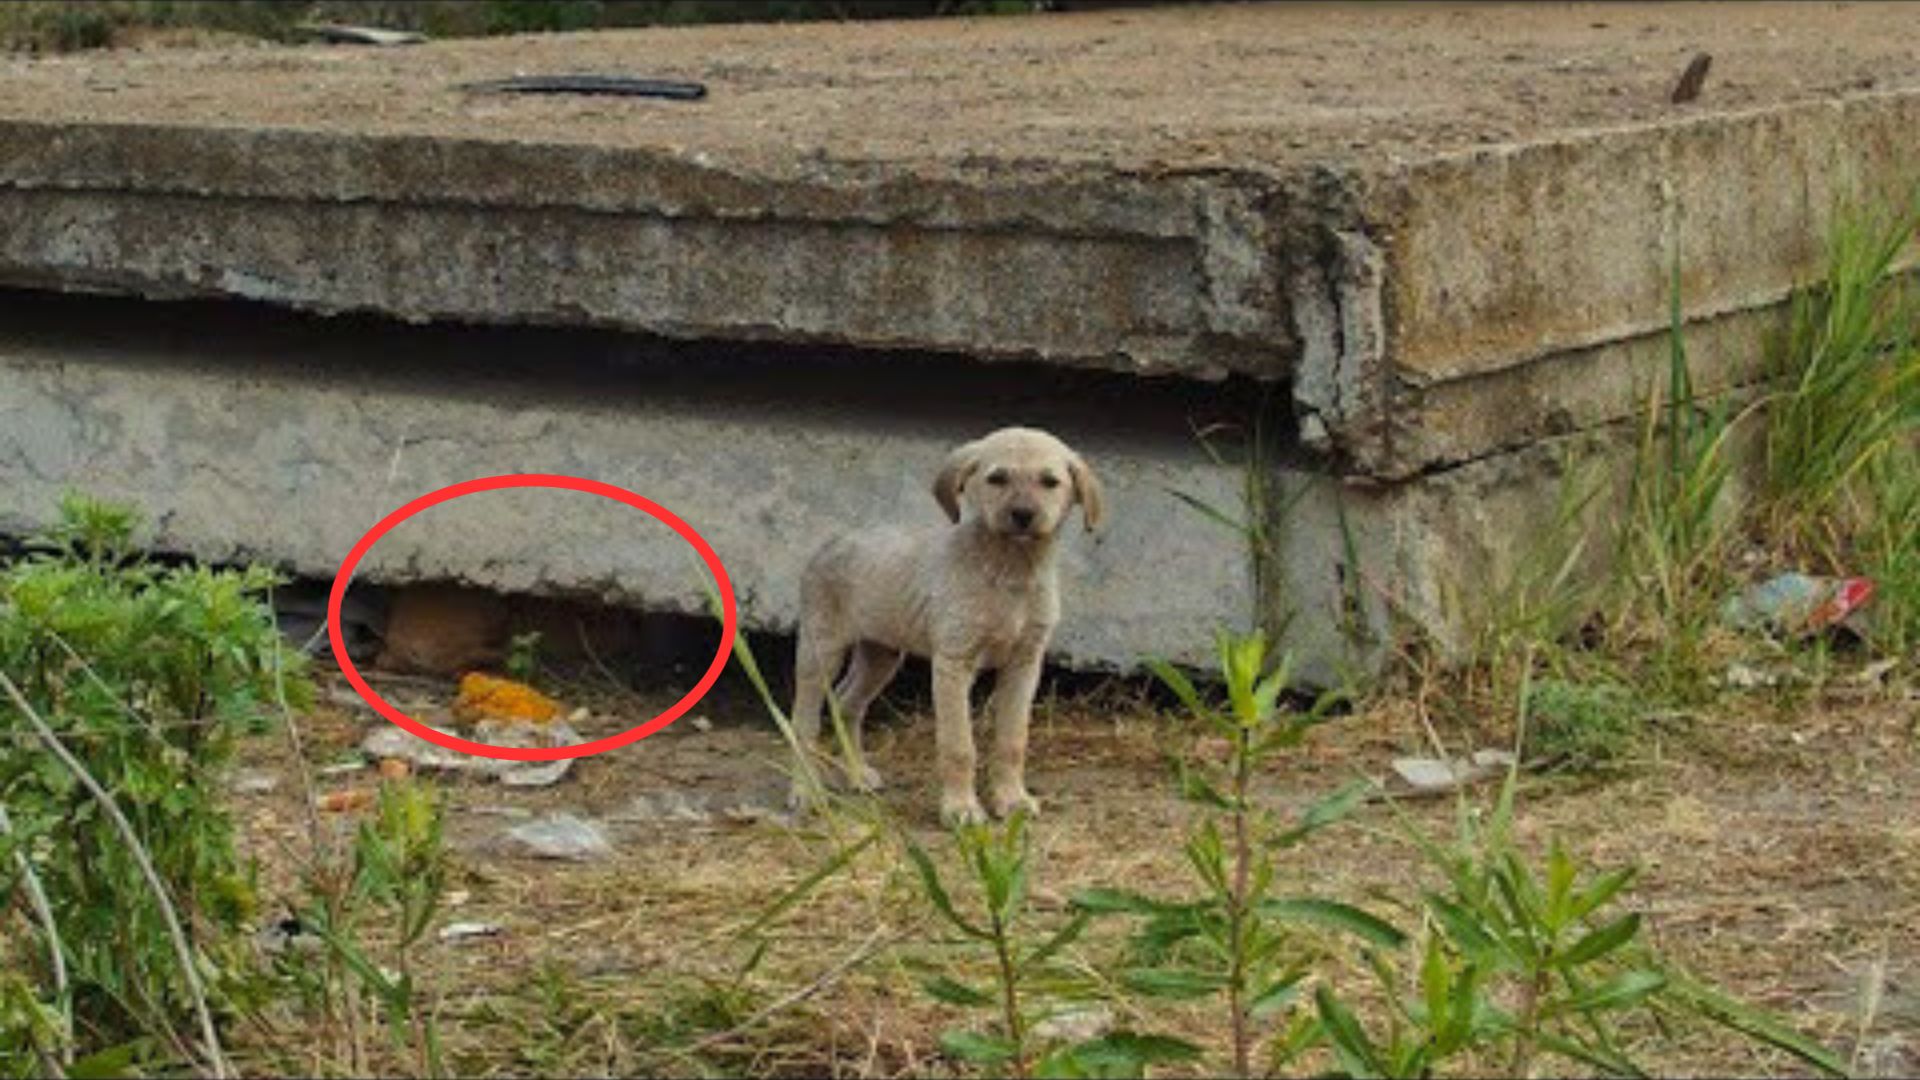 Rescuers Succeeded In Saving Stray Puppies, But They Still Had Many More Problems